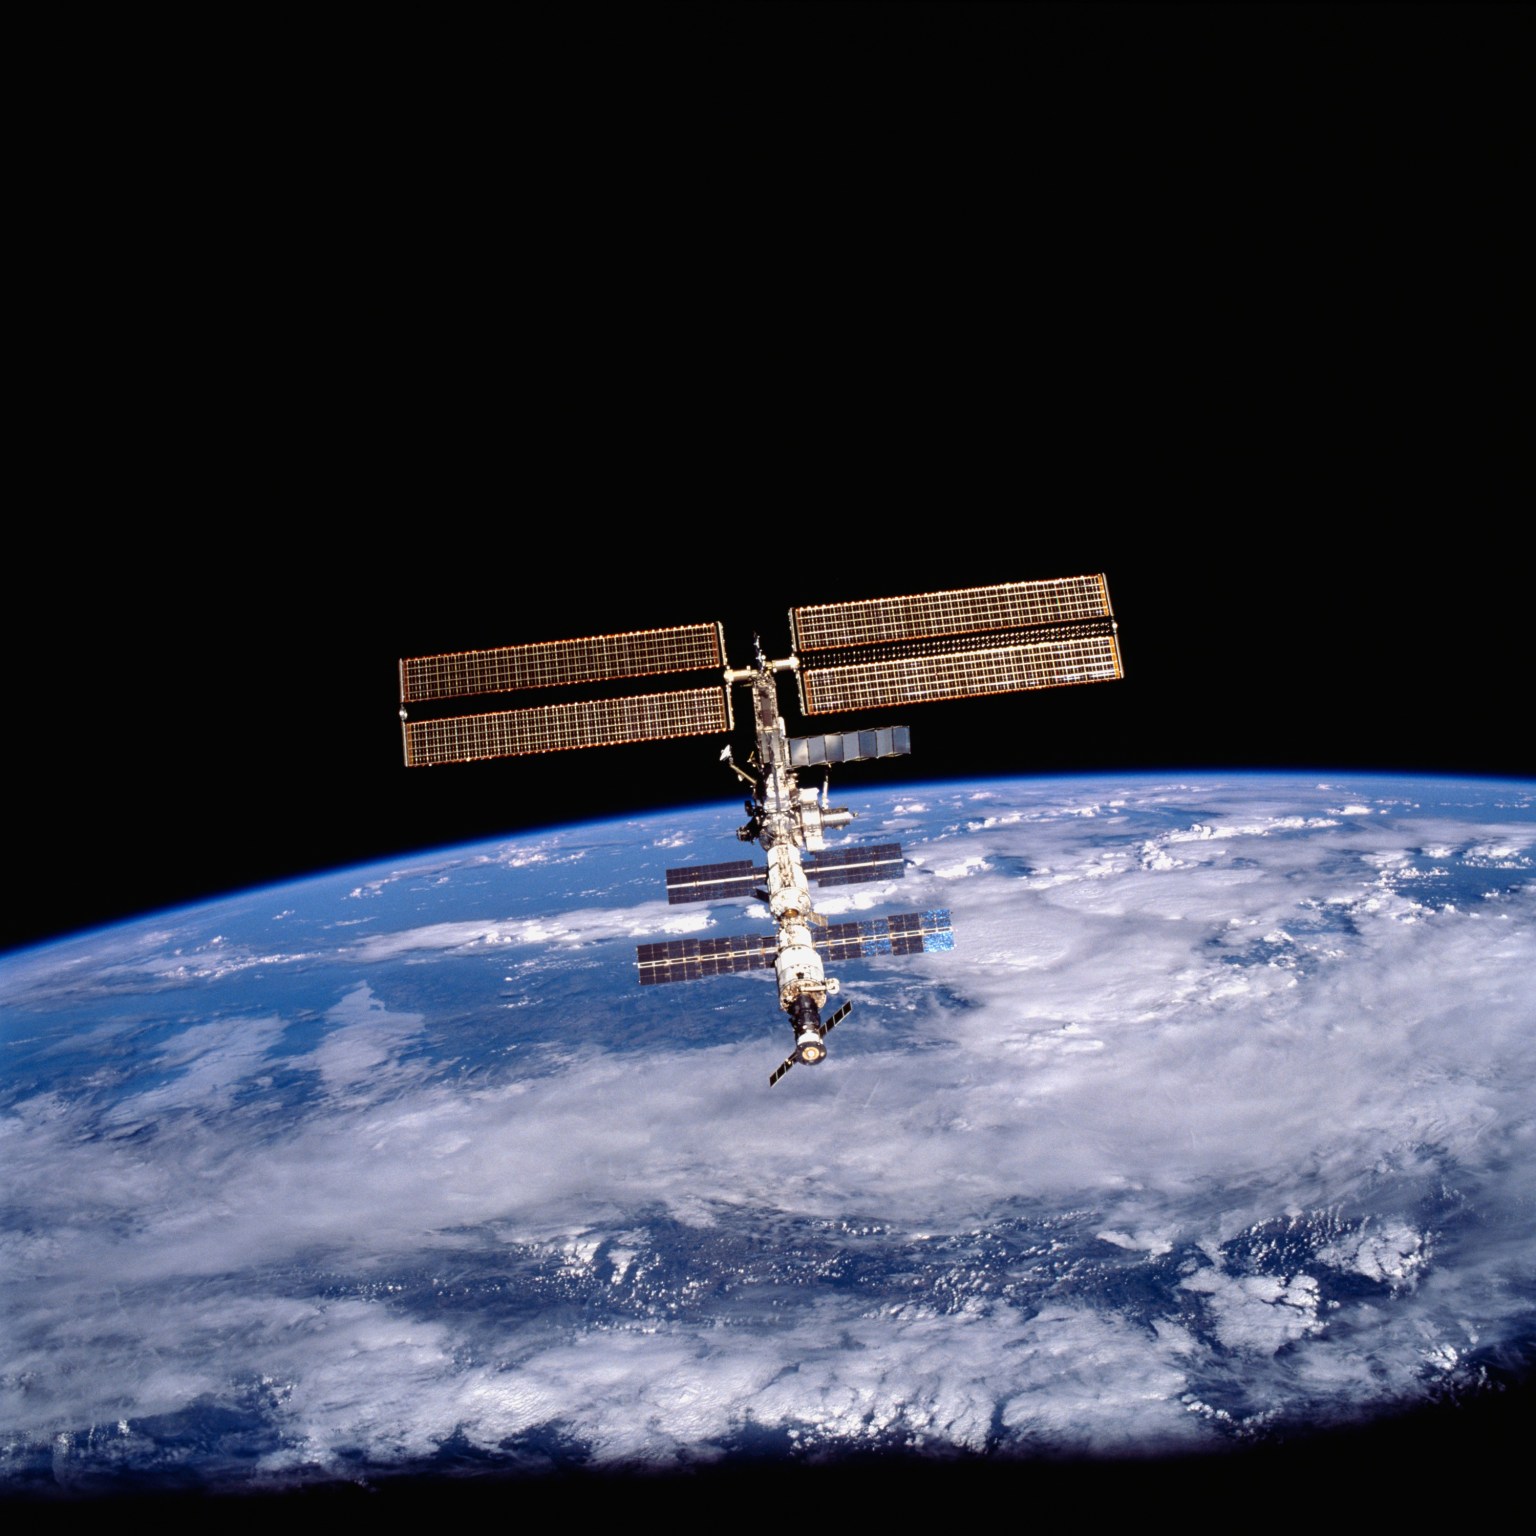 The International Space Station as seen from a Space Shuttle in 2001 with the Earth in the background.